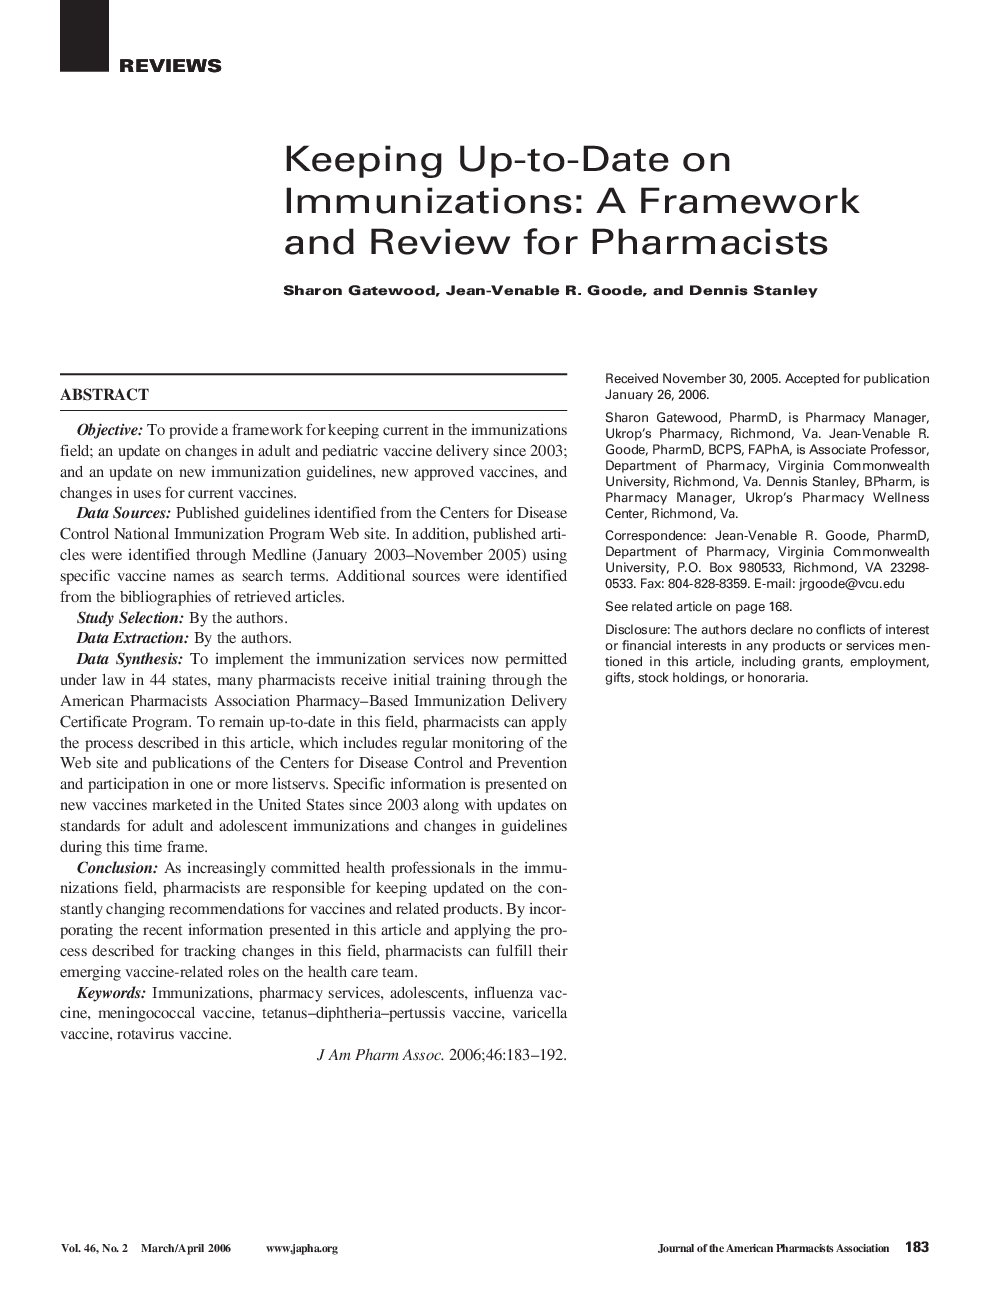 Keeping Up-to-Date on Immunizations: A Framework and Review for Pharmacists